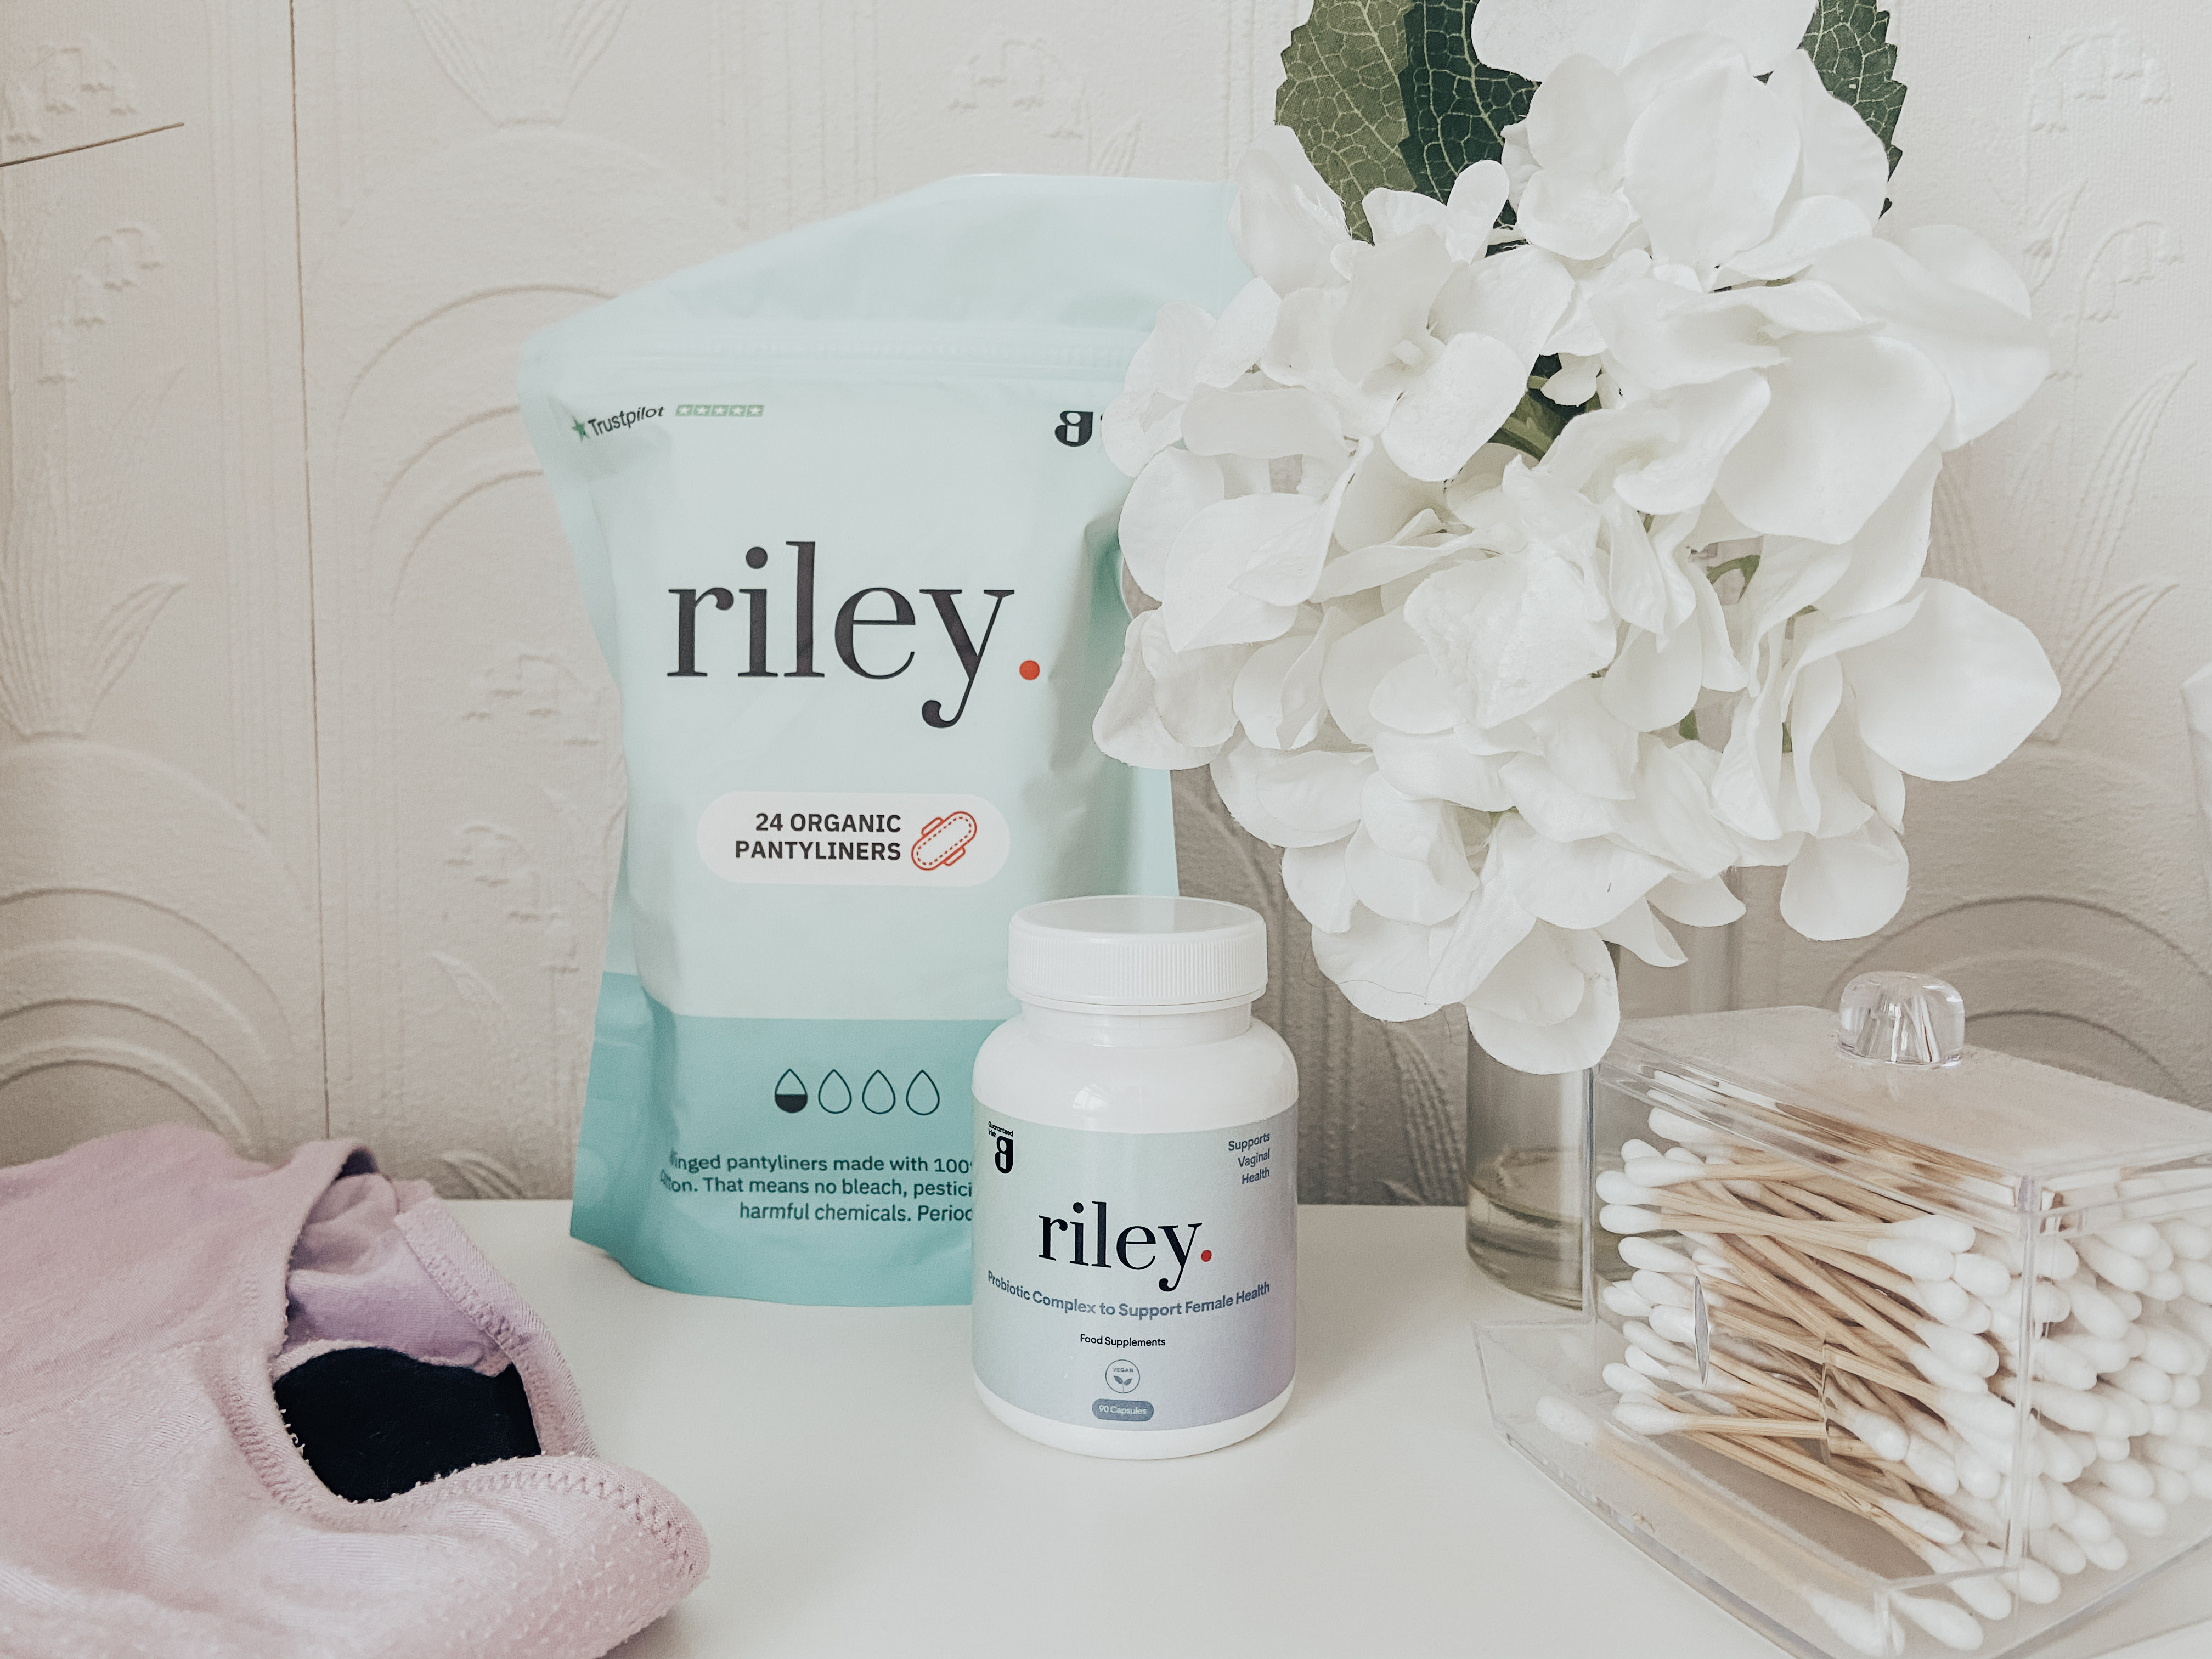 Riley pantyliners and probiotic supplement.